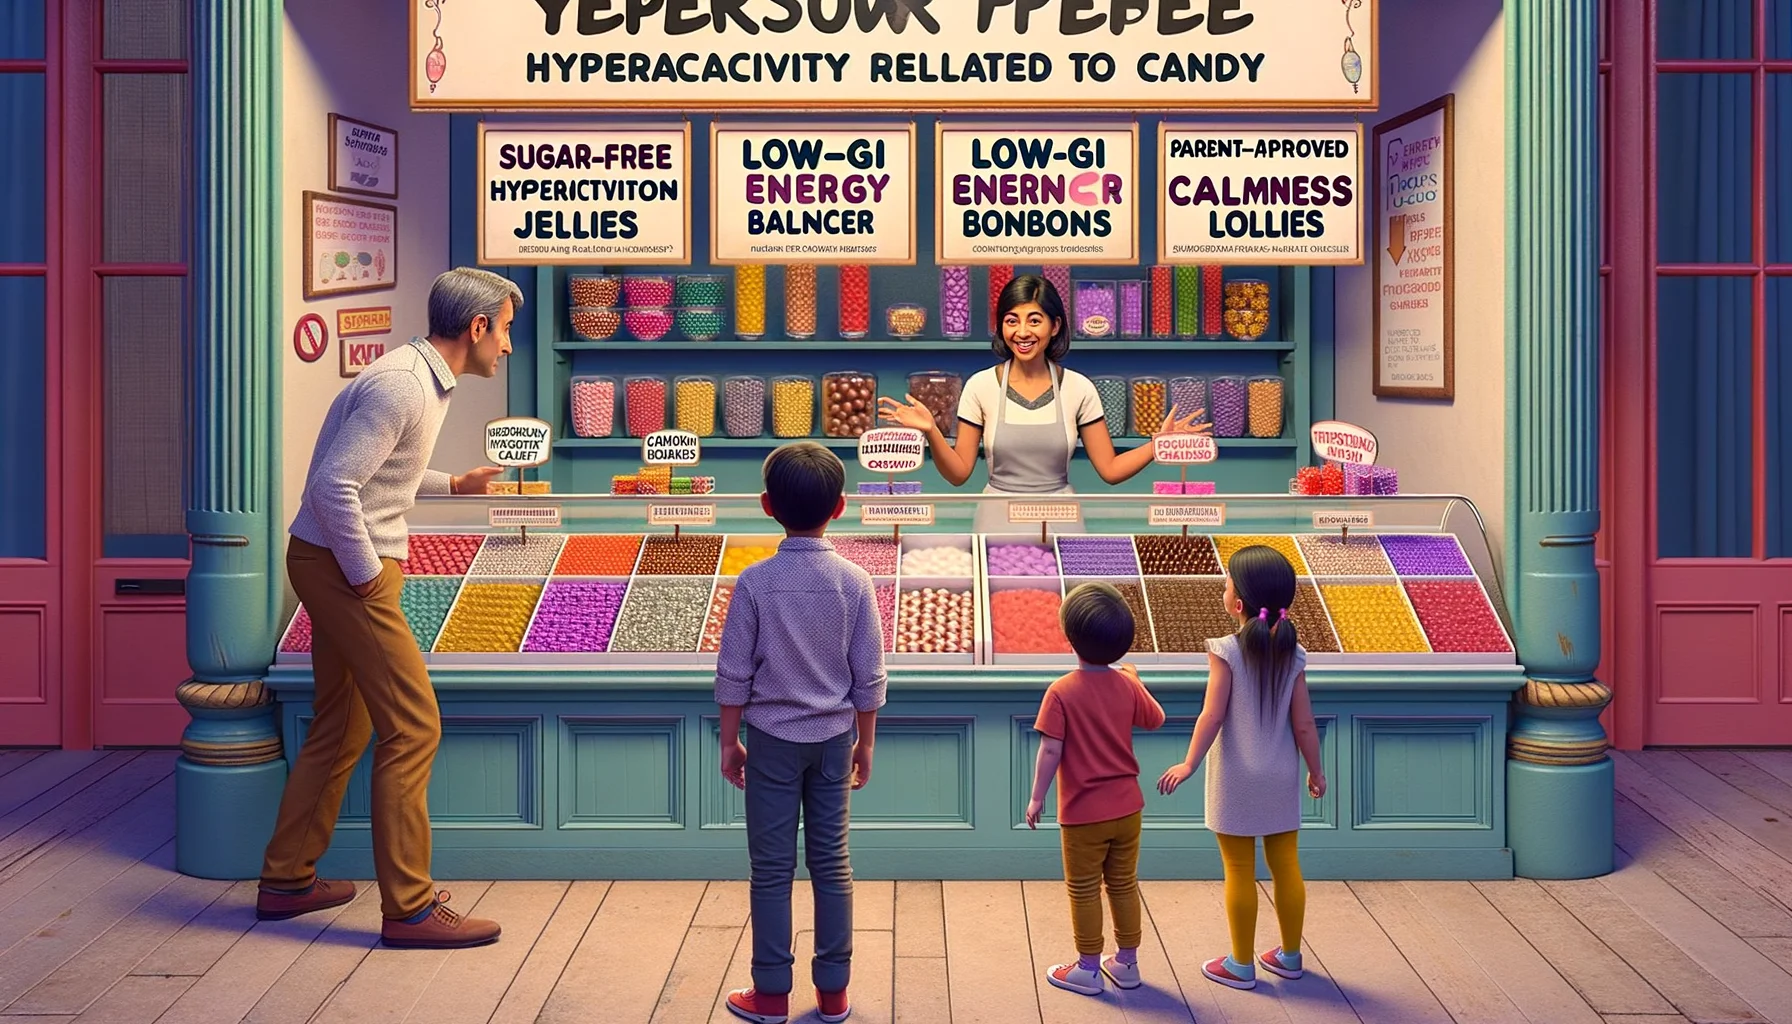 Imagine a humorous yet realistic image which stands as a commentary on hyperactivity concerns related to candy consumption. The setting is a sweet shop, with various displays of specialized sweets labeled with amusing, quasi-medical terminology like 'Sugar-Free Hyperactivity-inhibitor Jellies', 'Low-GI Energy Balancer Bonbons', and 'Parent-Approved Calmness Lollies'. The shopkeeper, a South Asian woman, is explaining the benefits of these candies to a Hispanic father, who seems overwhelmed but amused. His three children of various genders and Caucasian descent are seen pointing at and ooh-ing over the different displays, their excitement masterfully held in check.